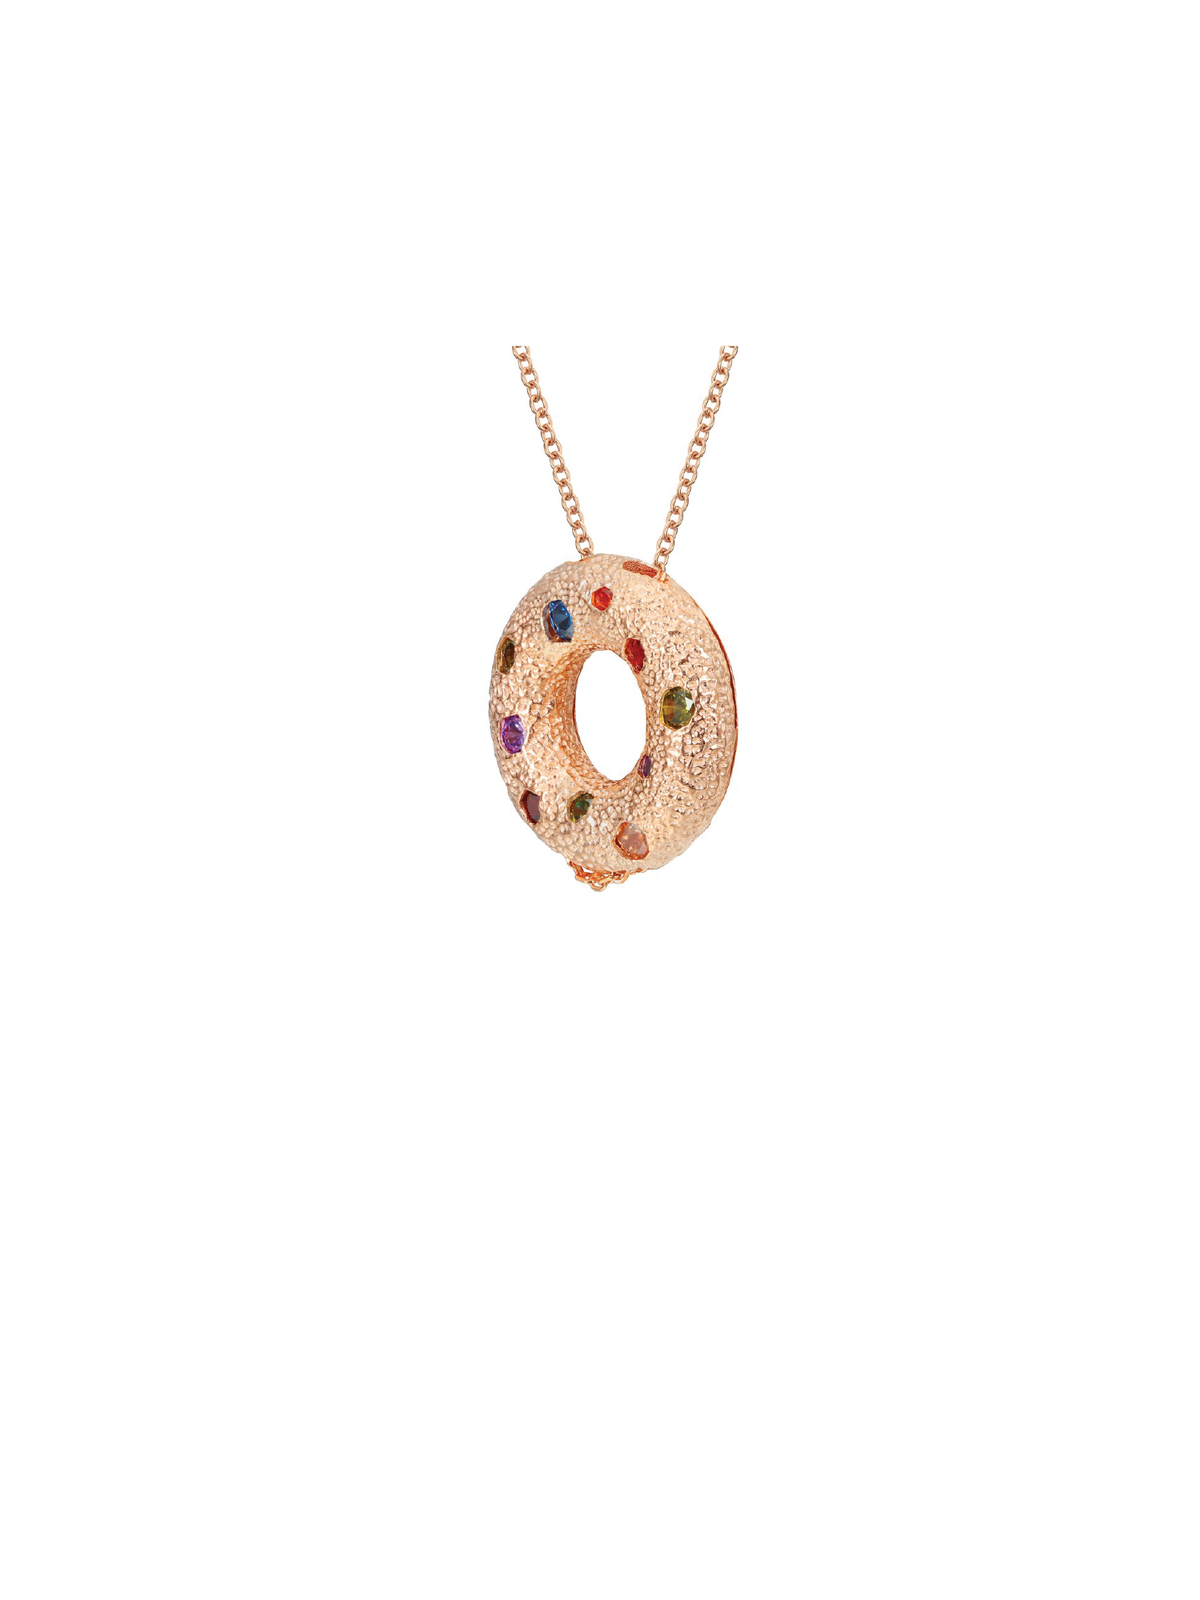 Halo Multiple Style Pendant - Small (Rose Gold)